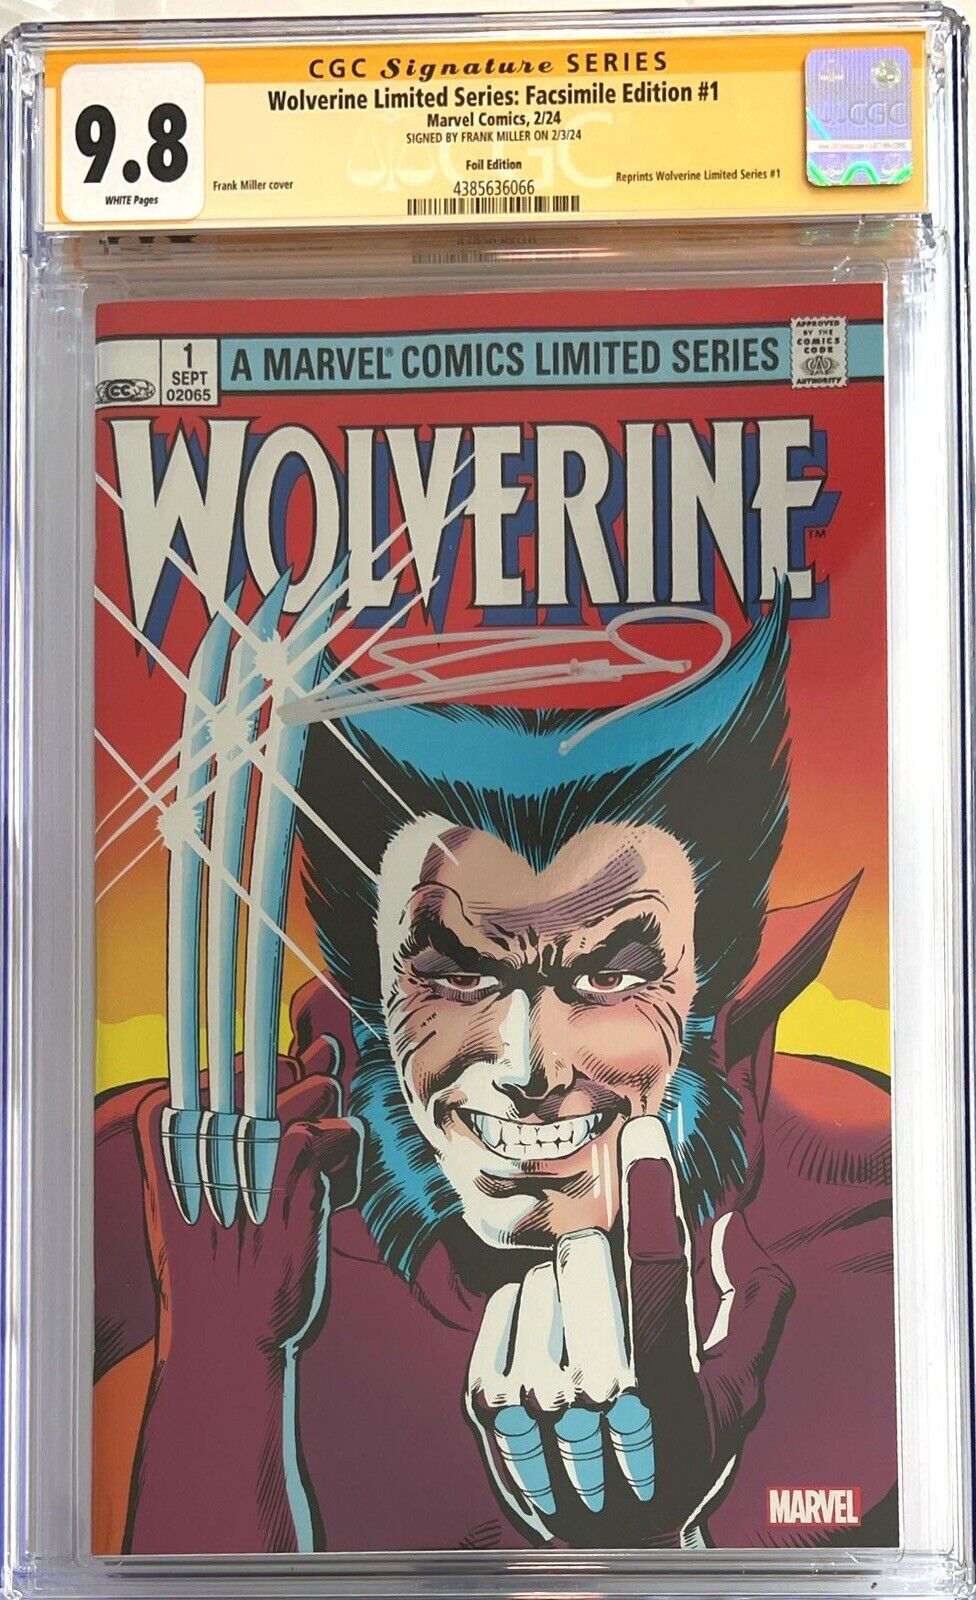 Wolverine Limited Series: Facsimile Ed. #1 CGC SS 9.8 Signed by Frank Miller